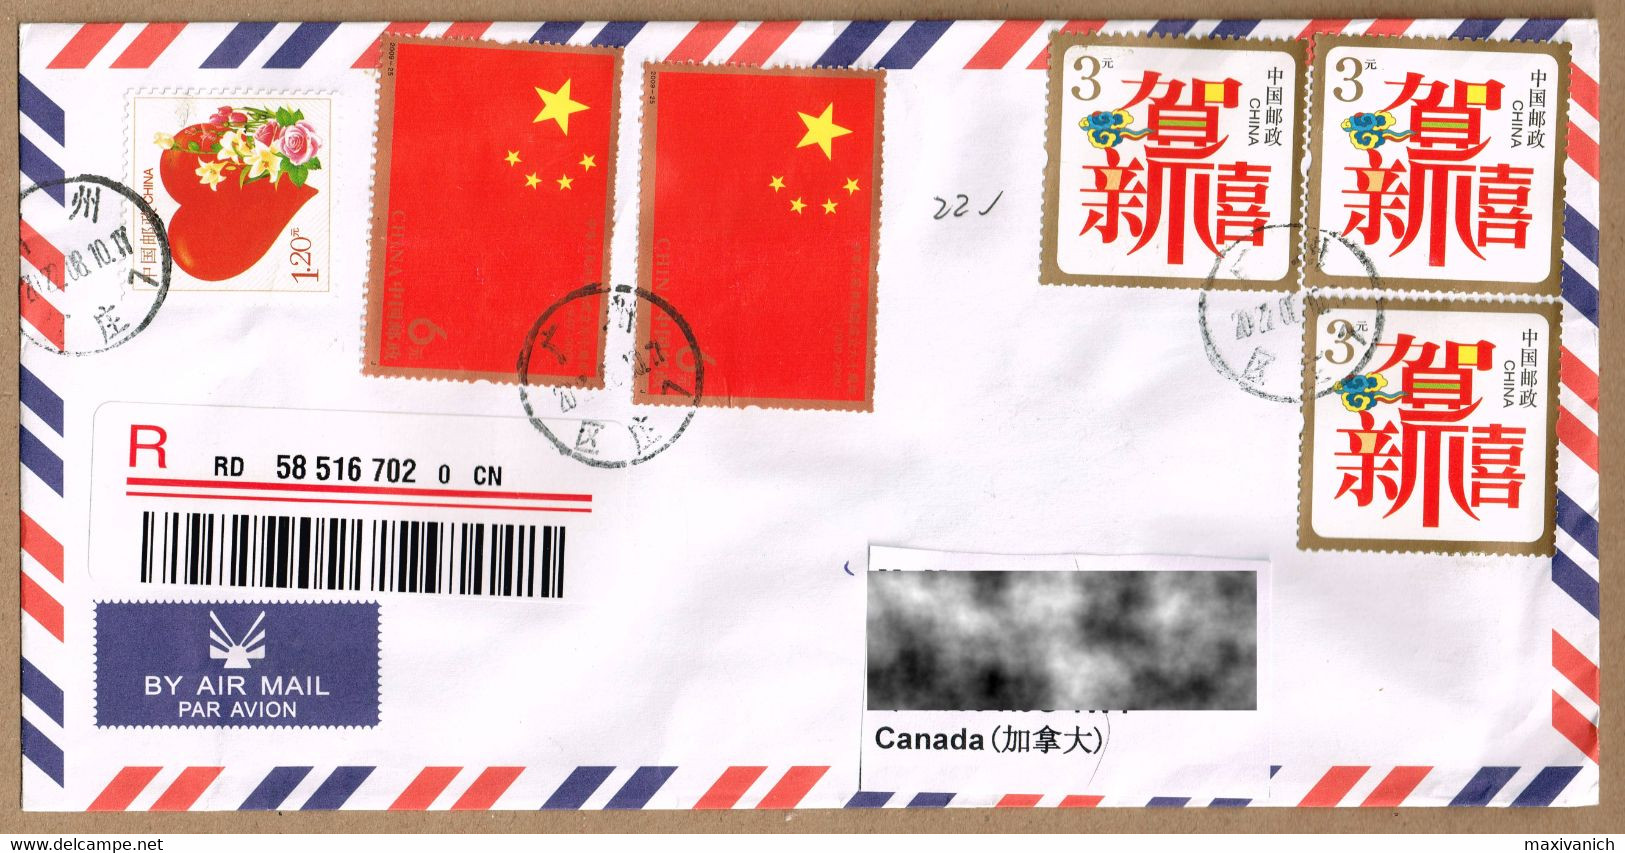 China 2009 60th Anniversary Founding 2010 Happy New Year 2013 Hearts & Flowers Cover To Canada - Oblitérés